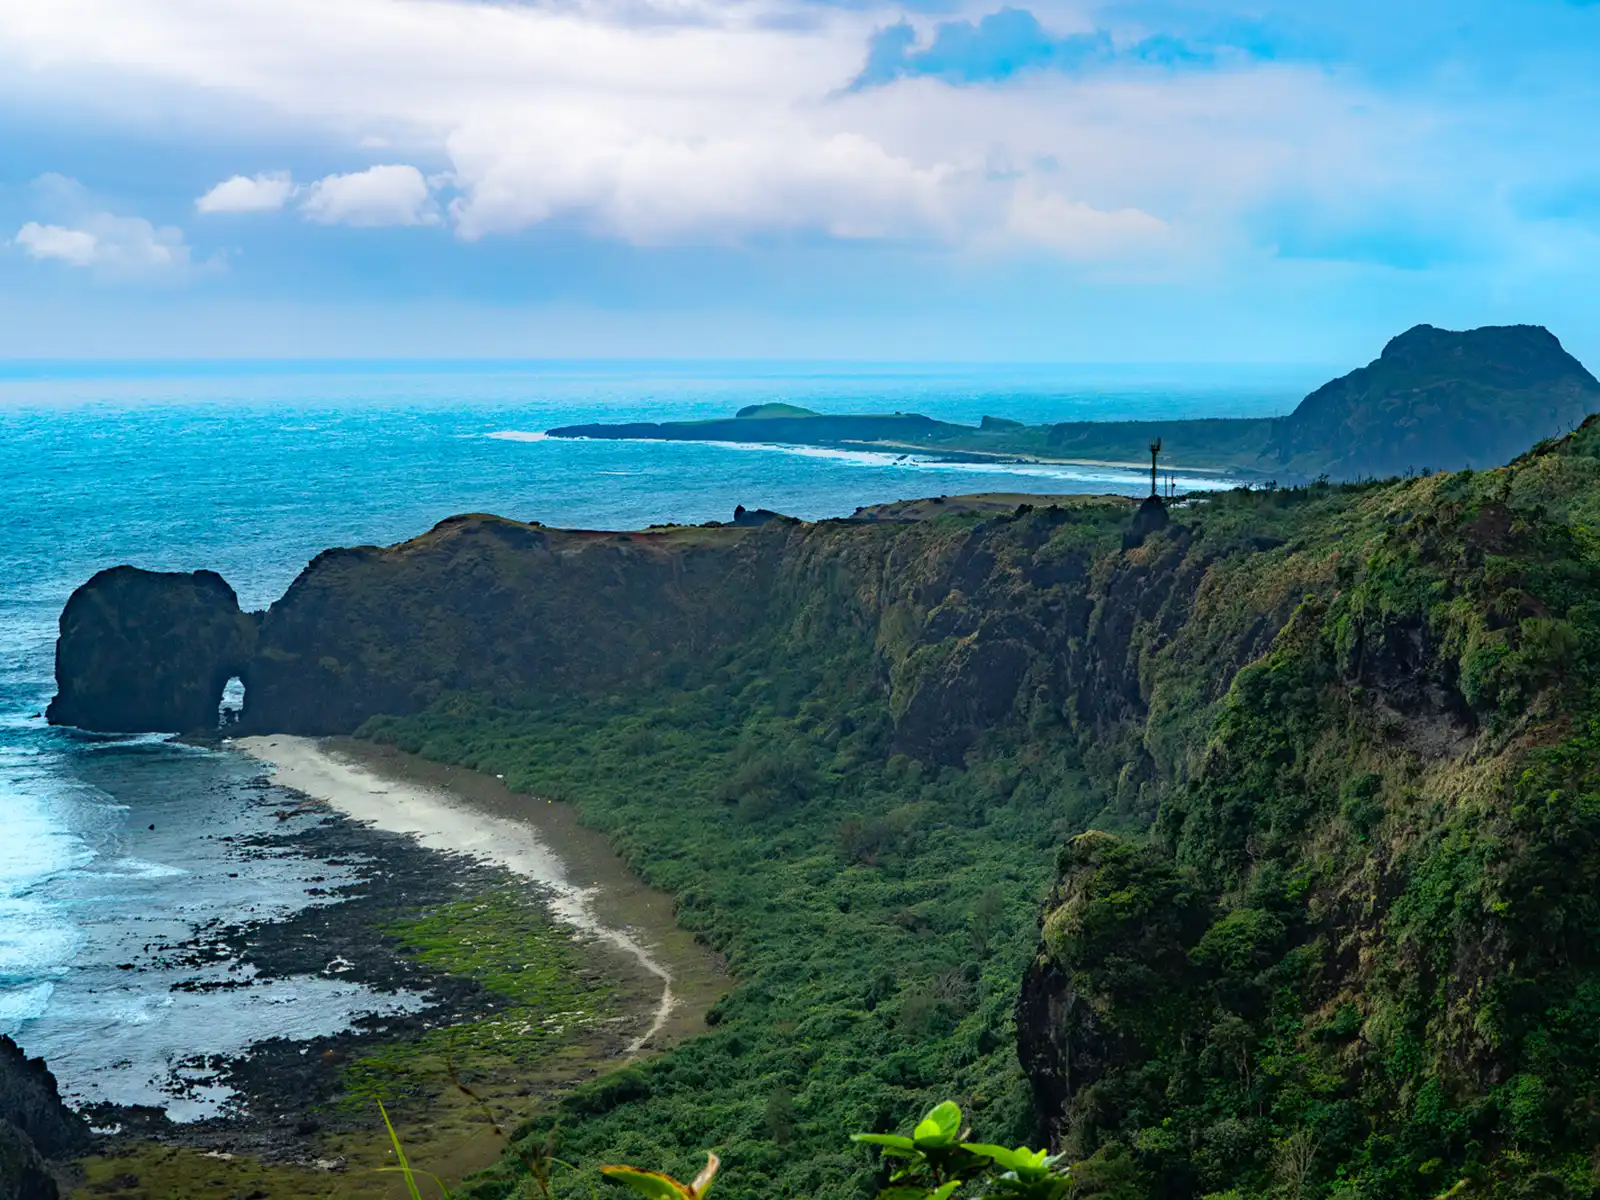 Beneath a rocky promontory, a sandy beach, lush jungle, and volcanic rock all blend together to form a strip of coastline.